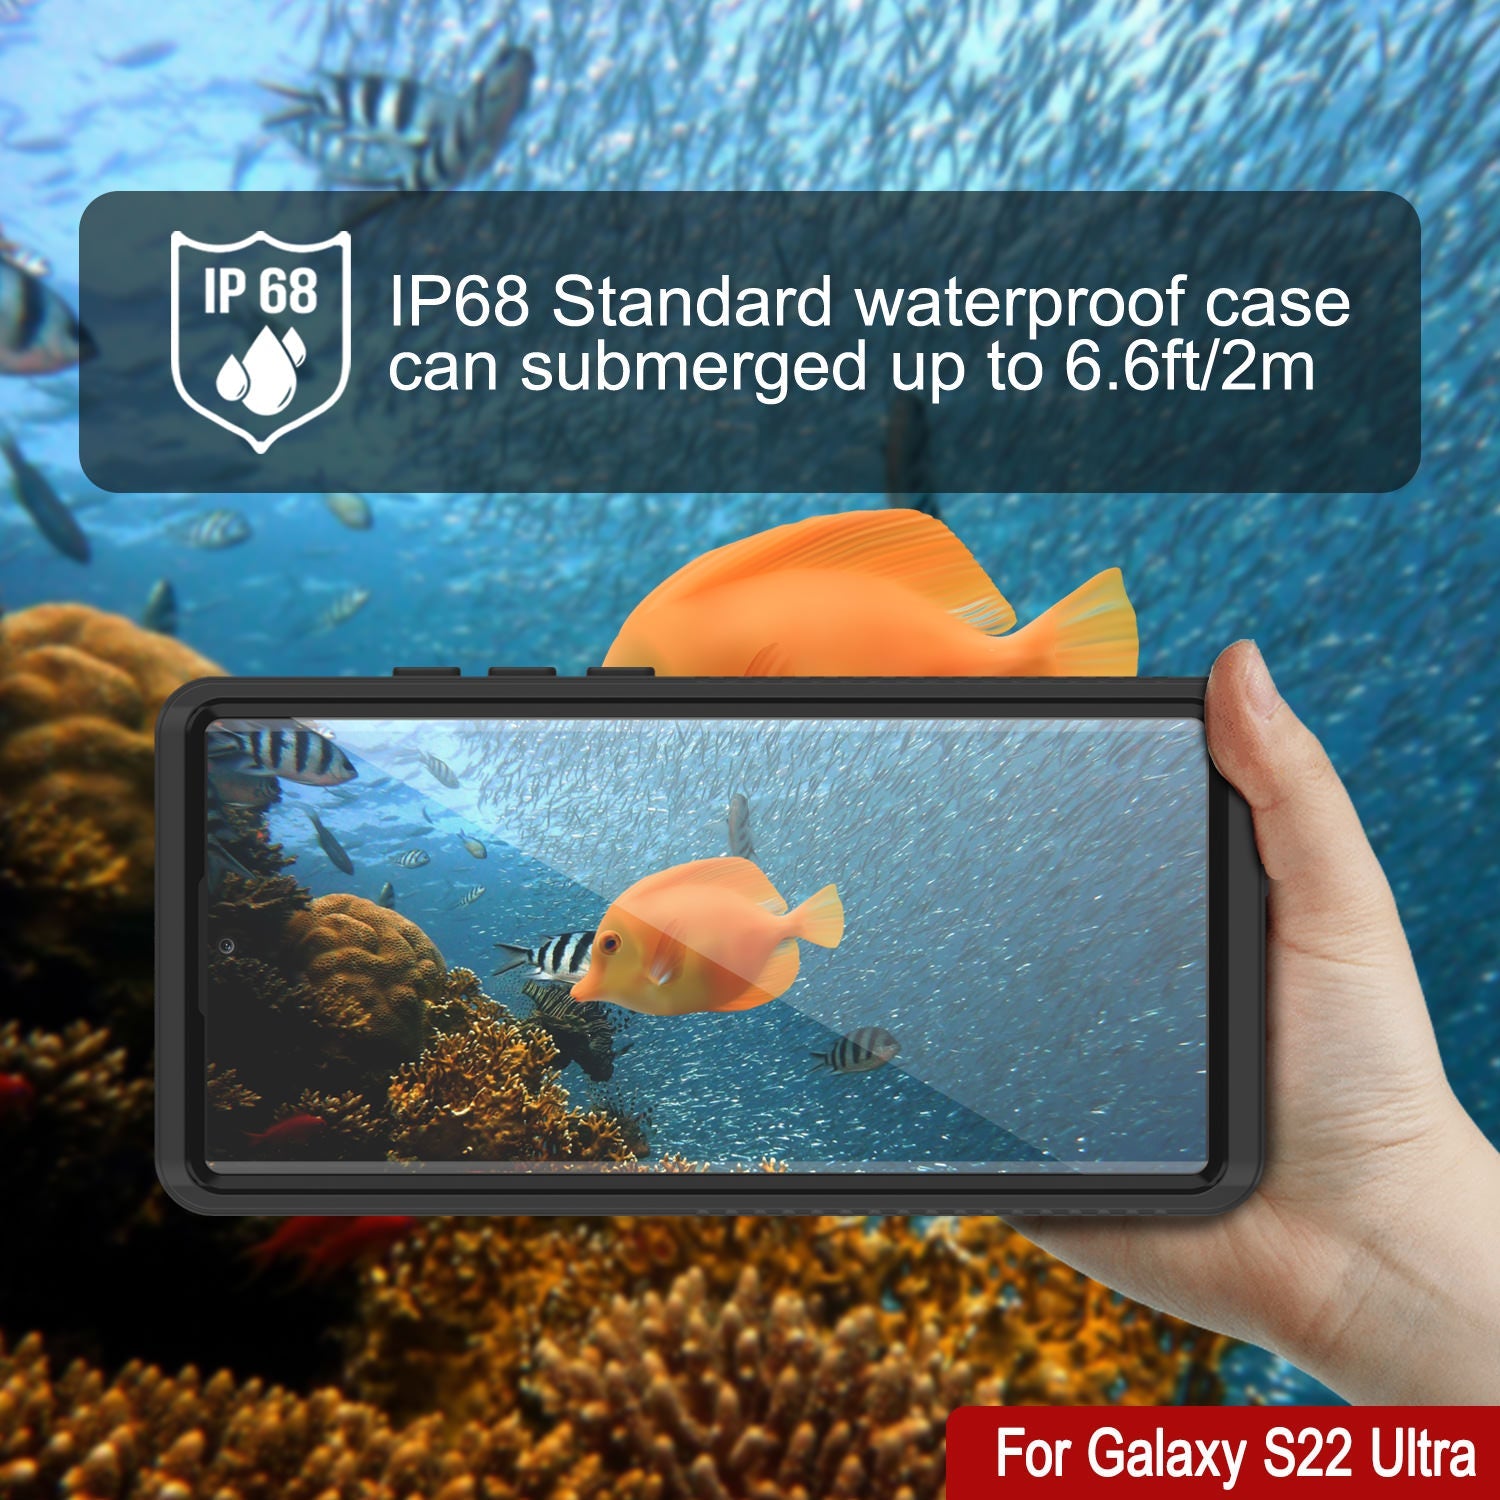 Waterproof Galaxy S22 Ultra Case with Screen Protector - Black